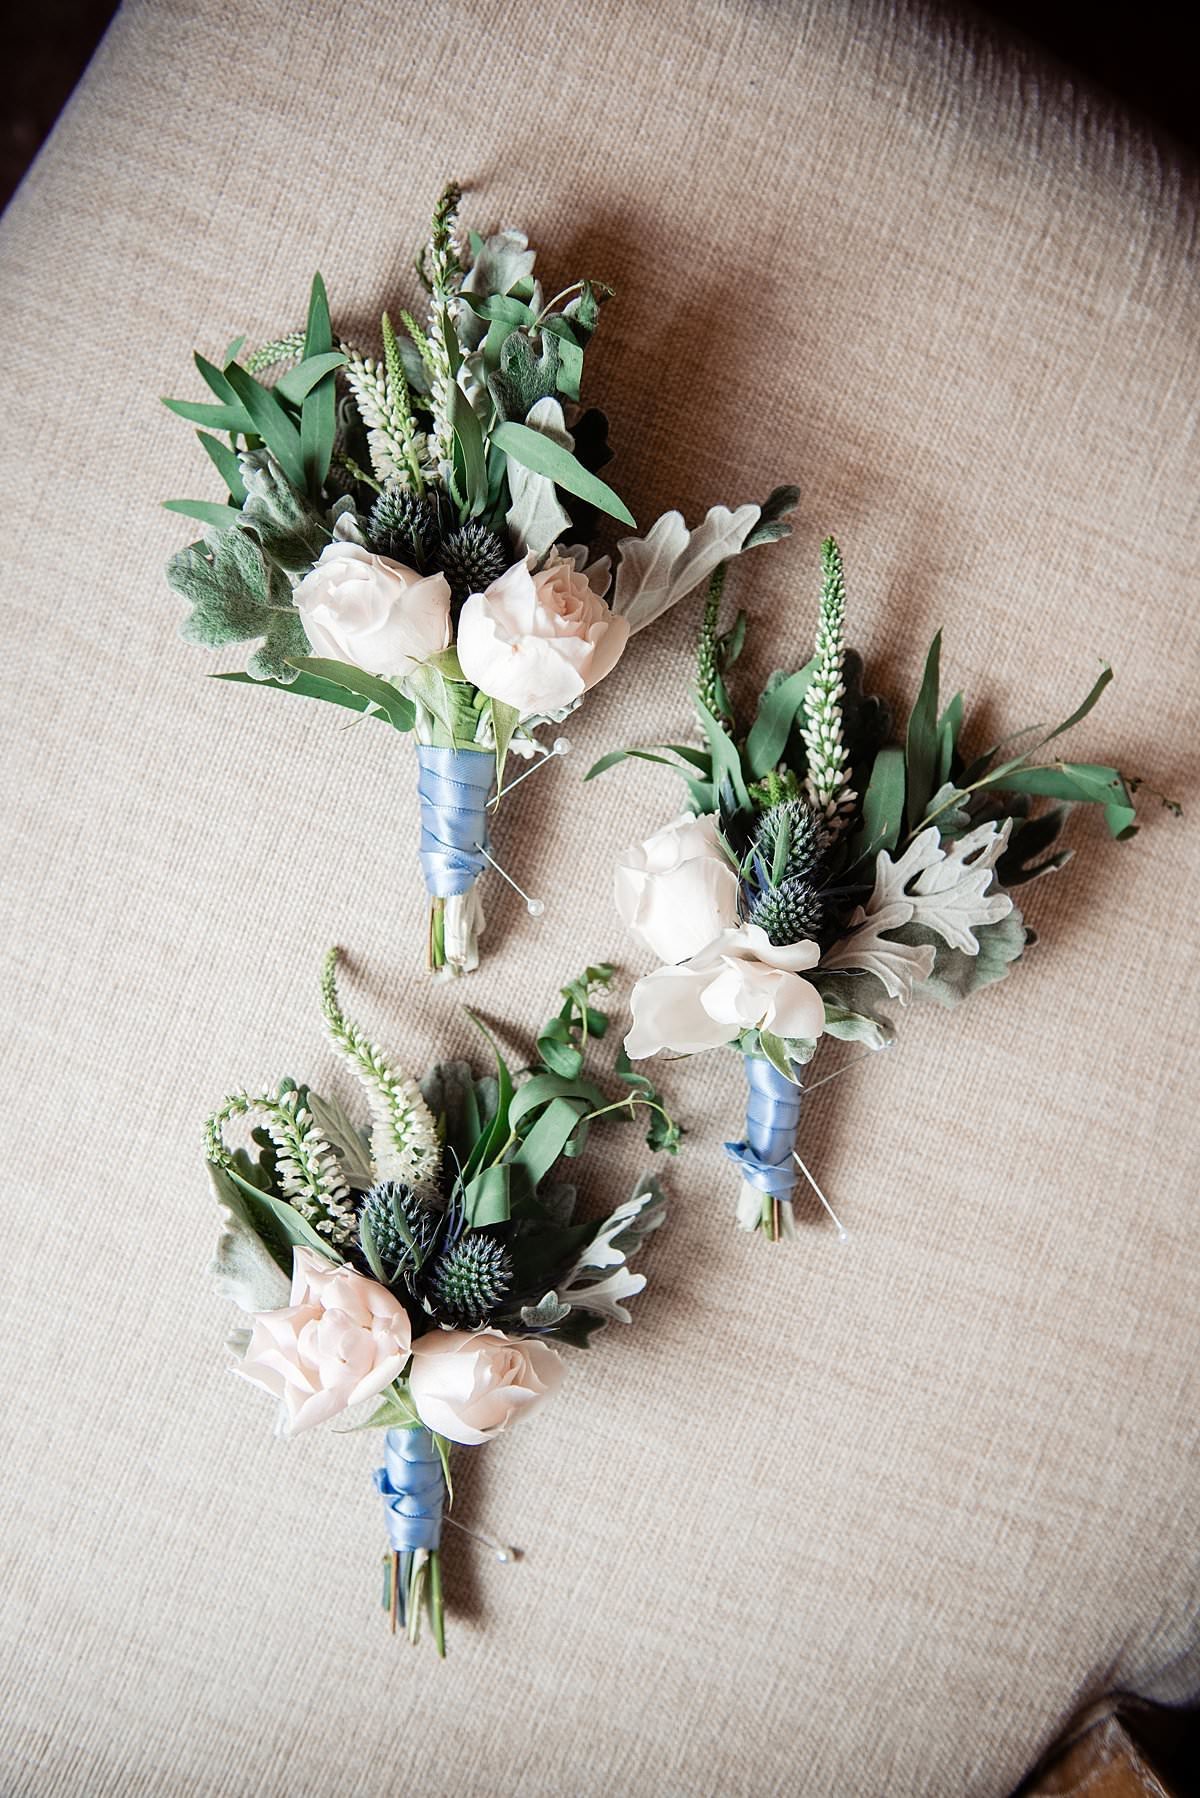 Boutonnieres of ivory mini roses with greenery sprigs